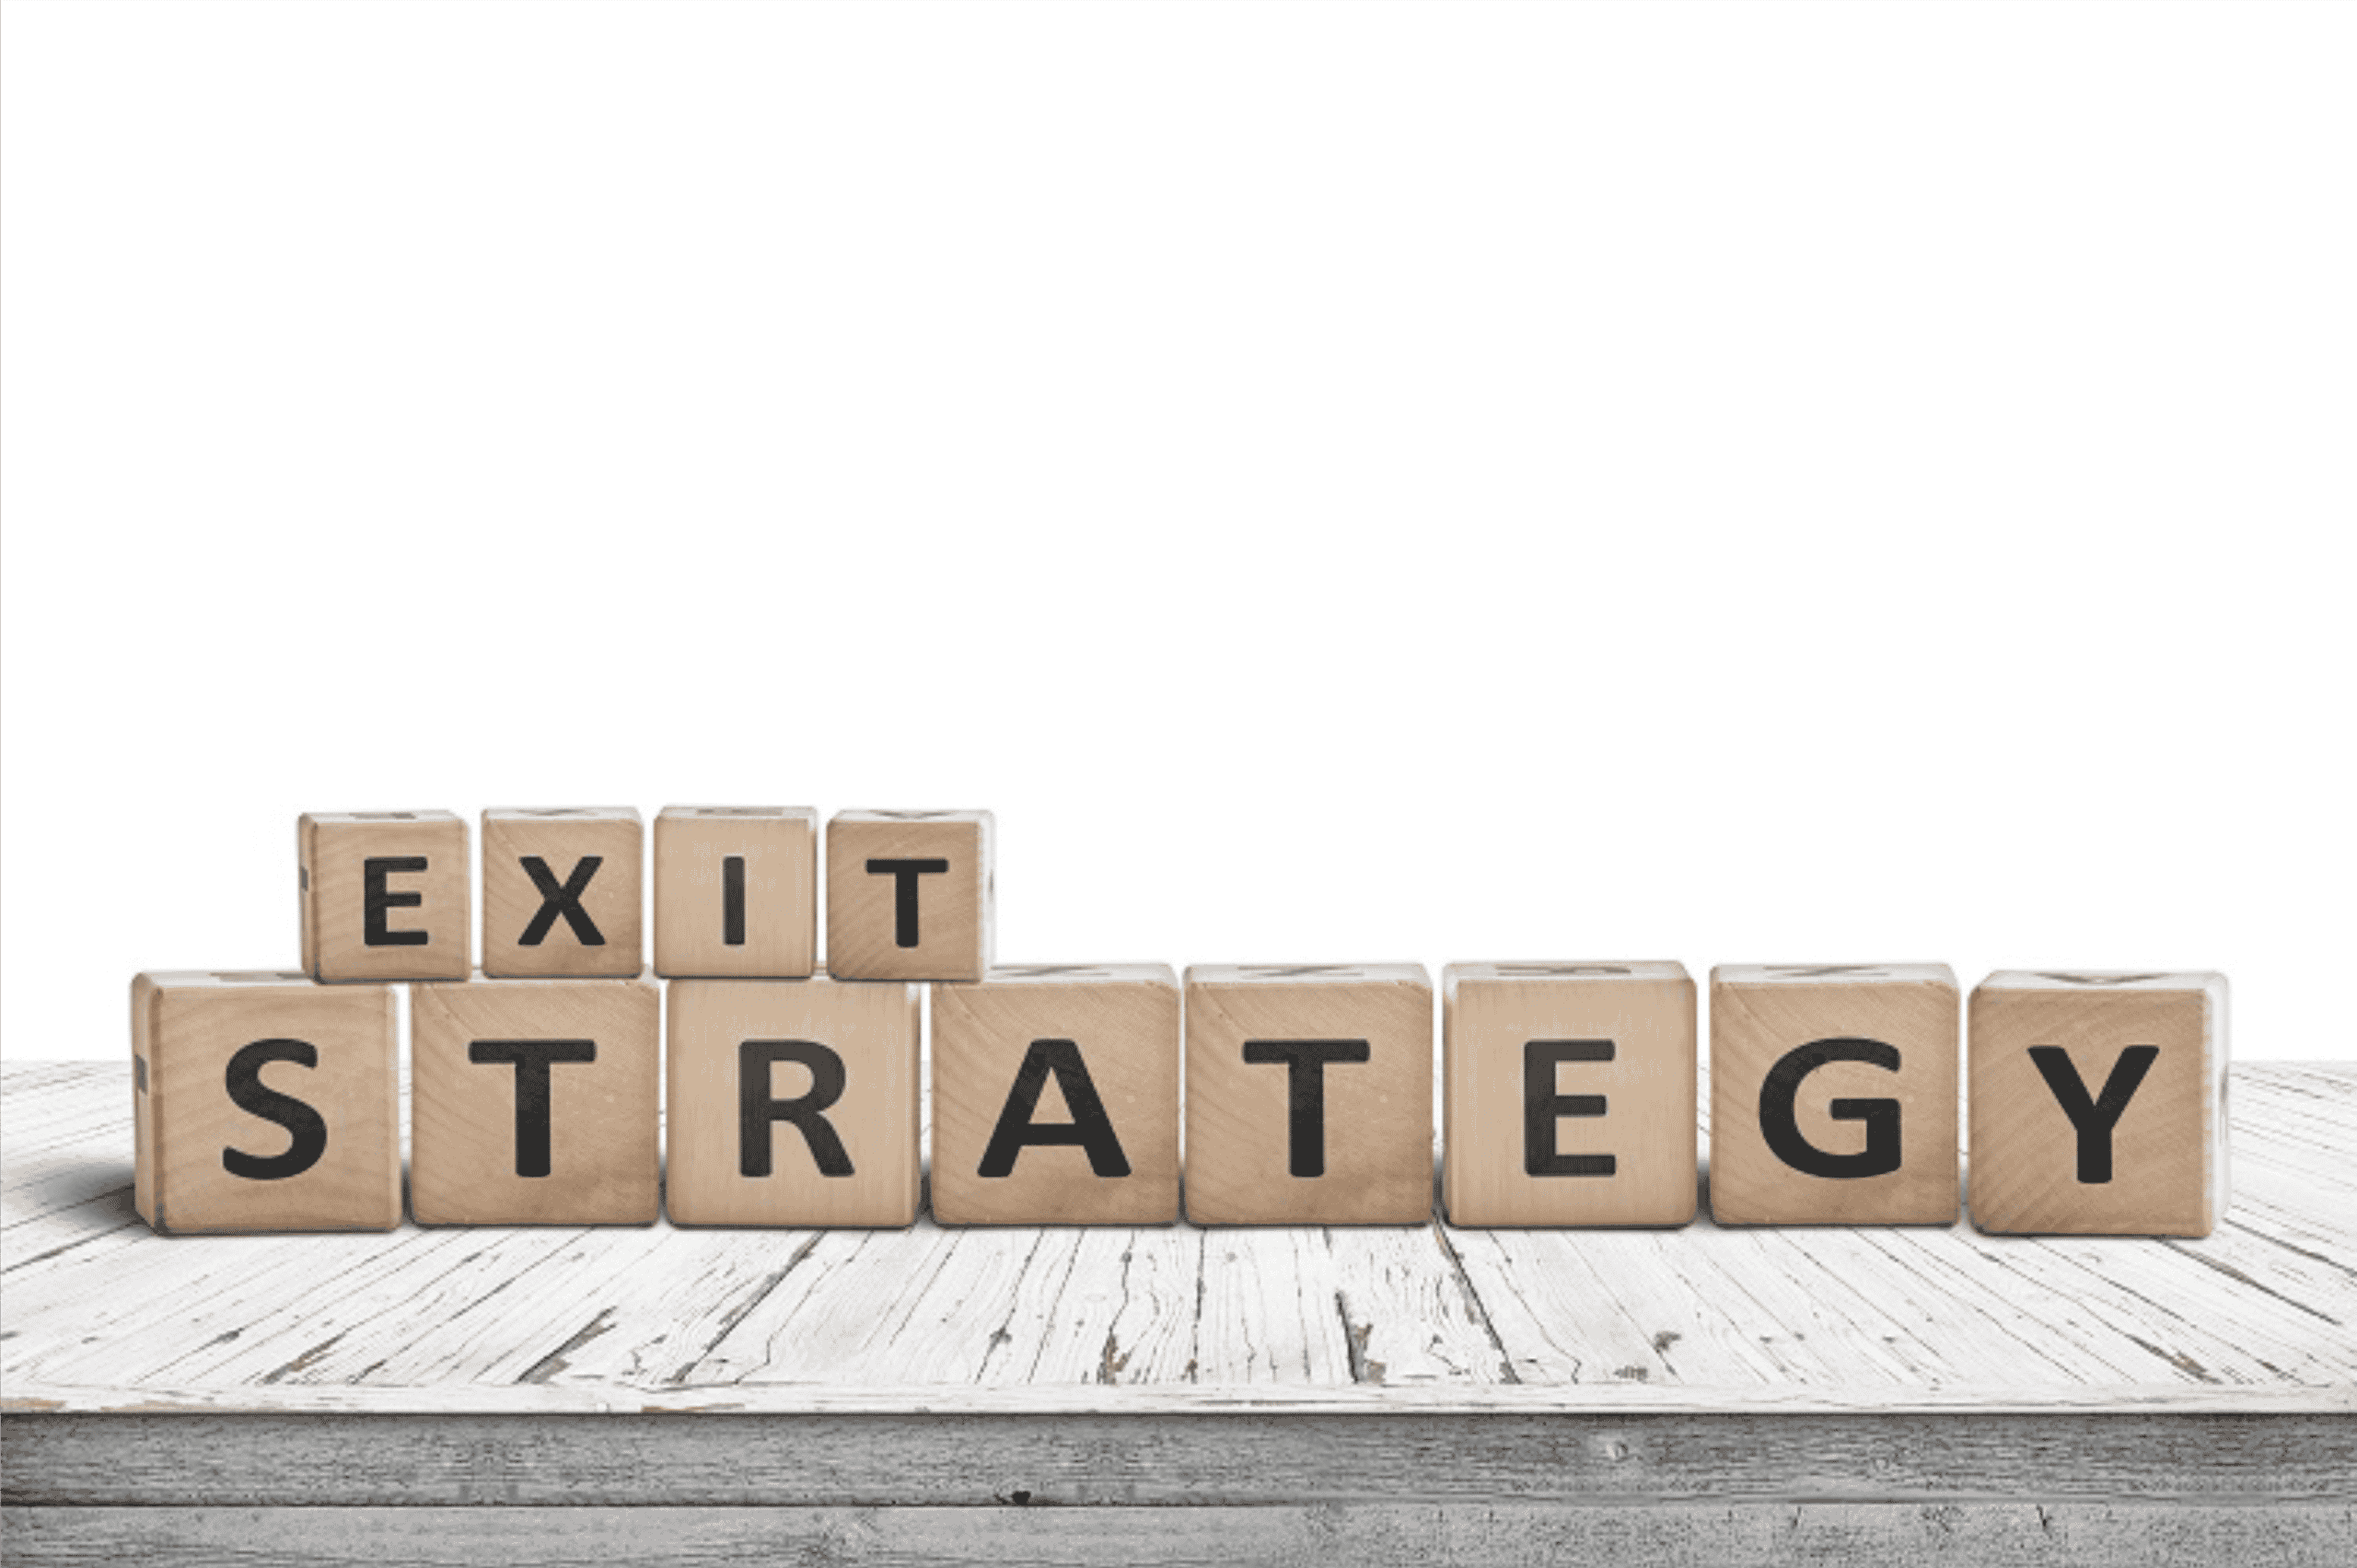 What are the 5 exit strategies